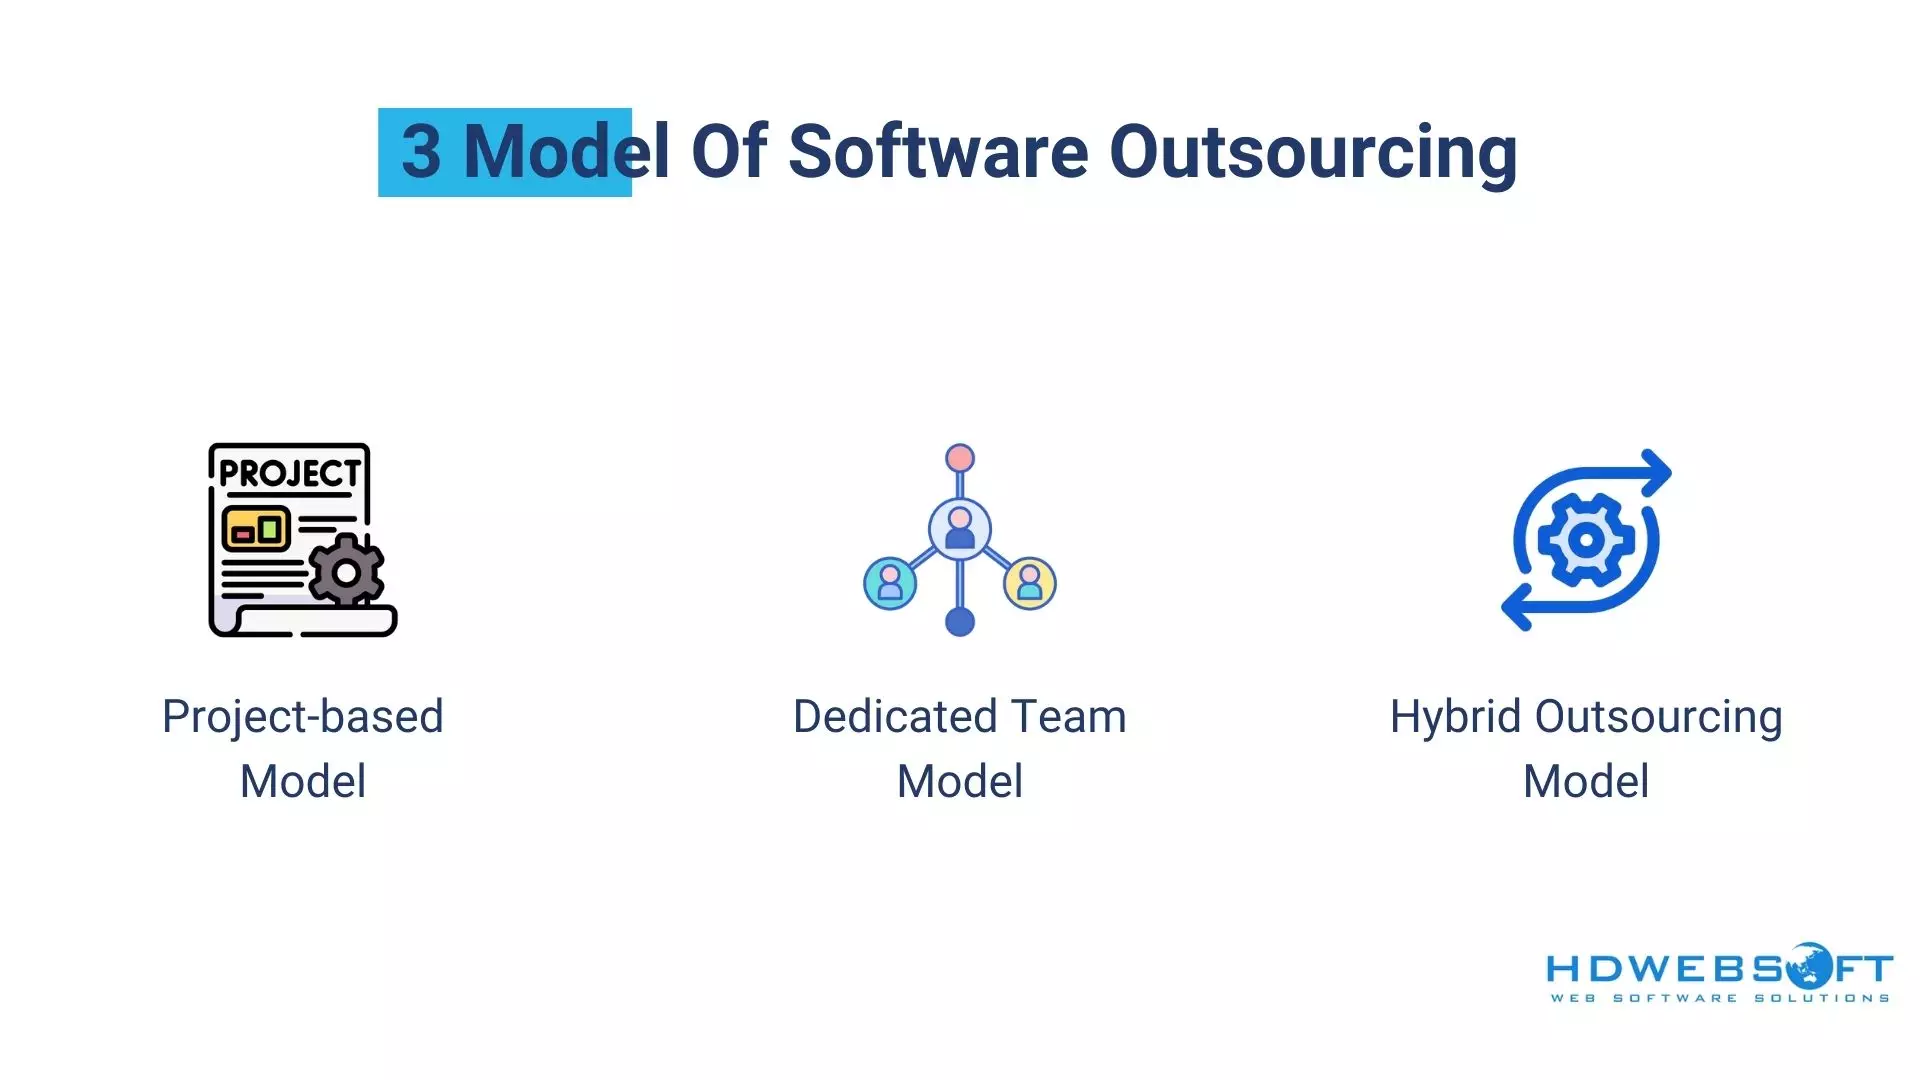 software outsourcing models